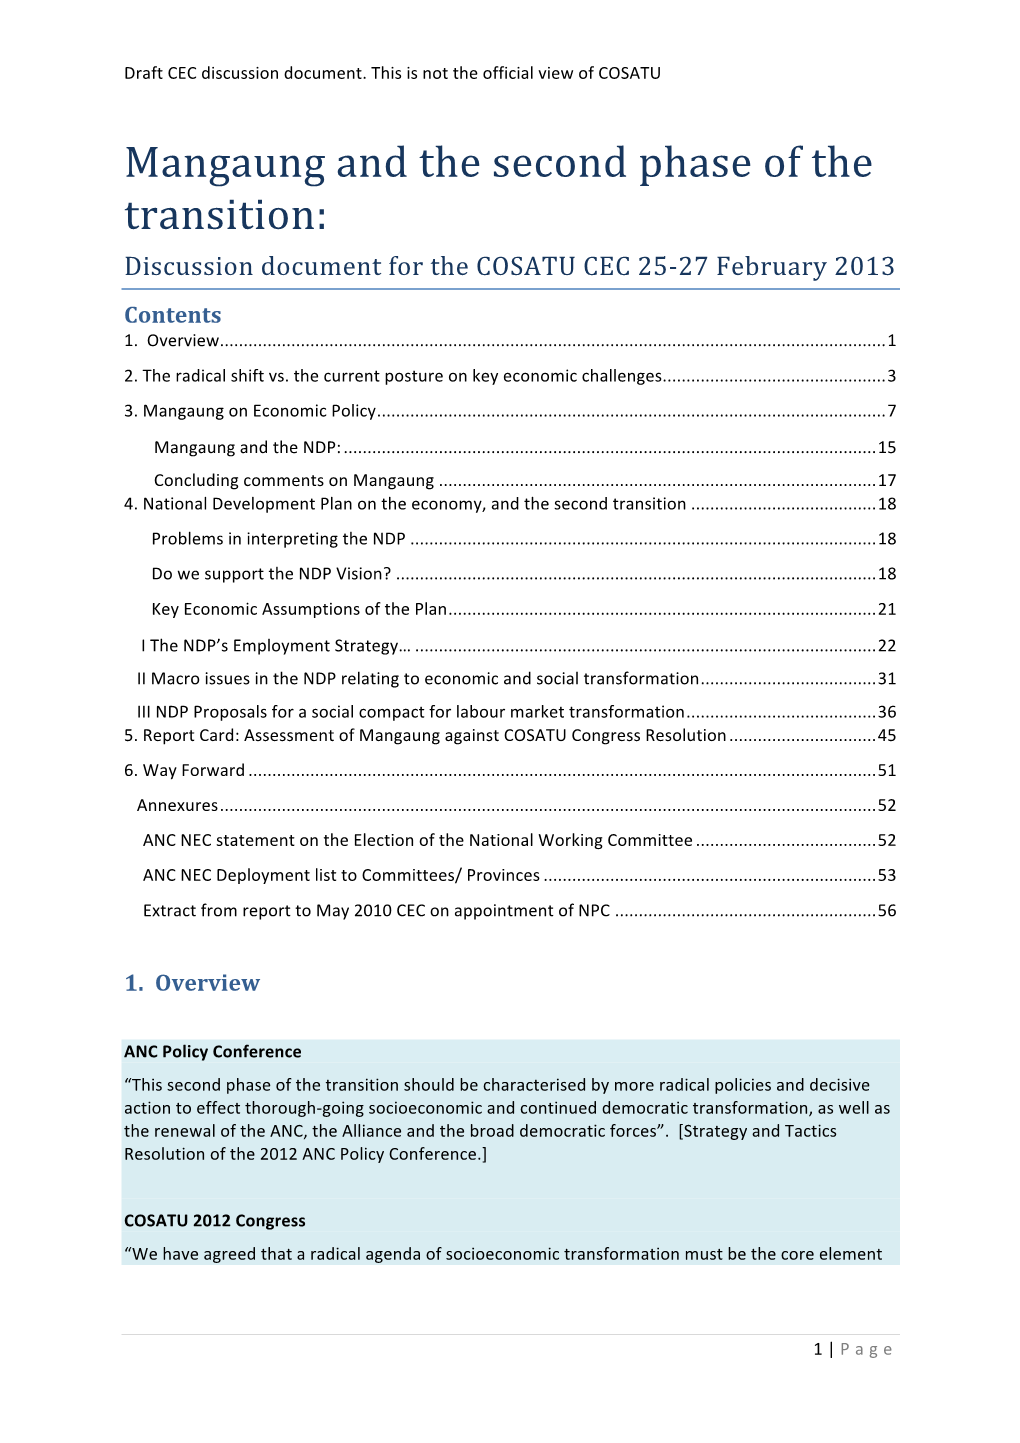 Mangaung and the Second Phase of the Transition: Discussion Document for the COSATU CEC 25-27 February 2013 Contents 1